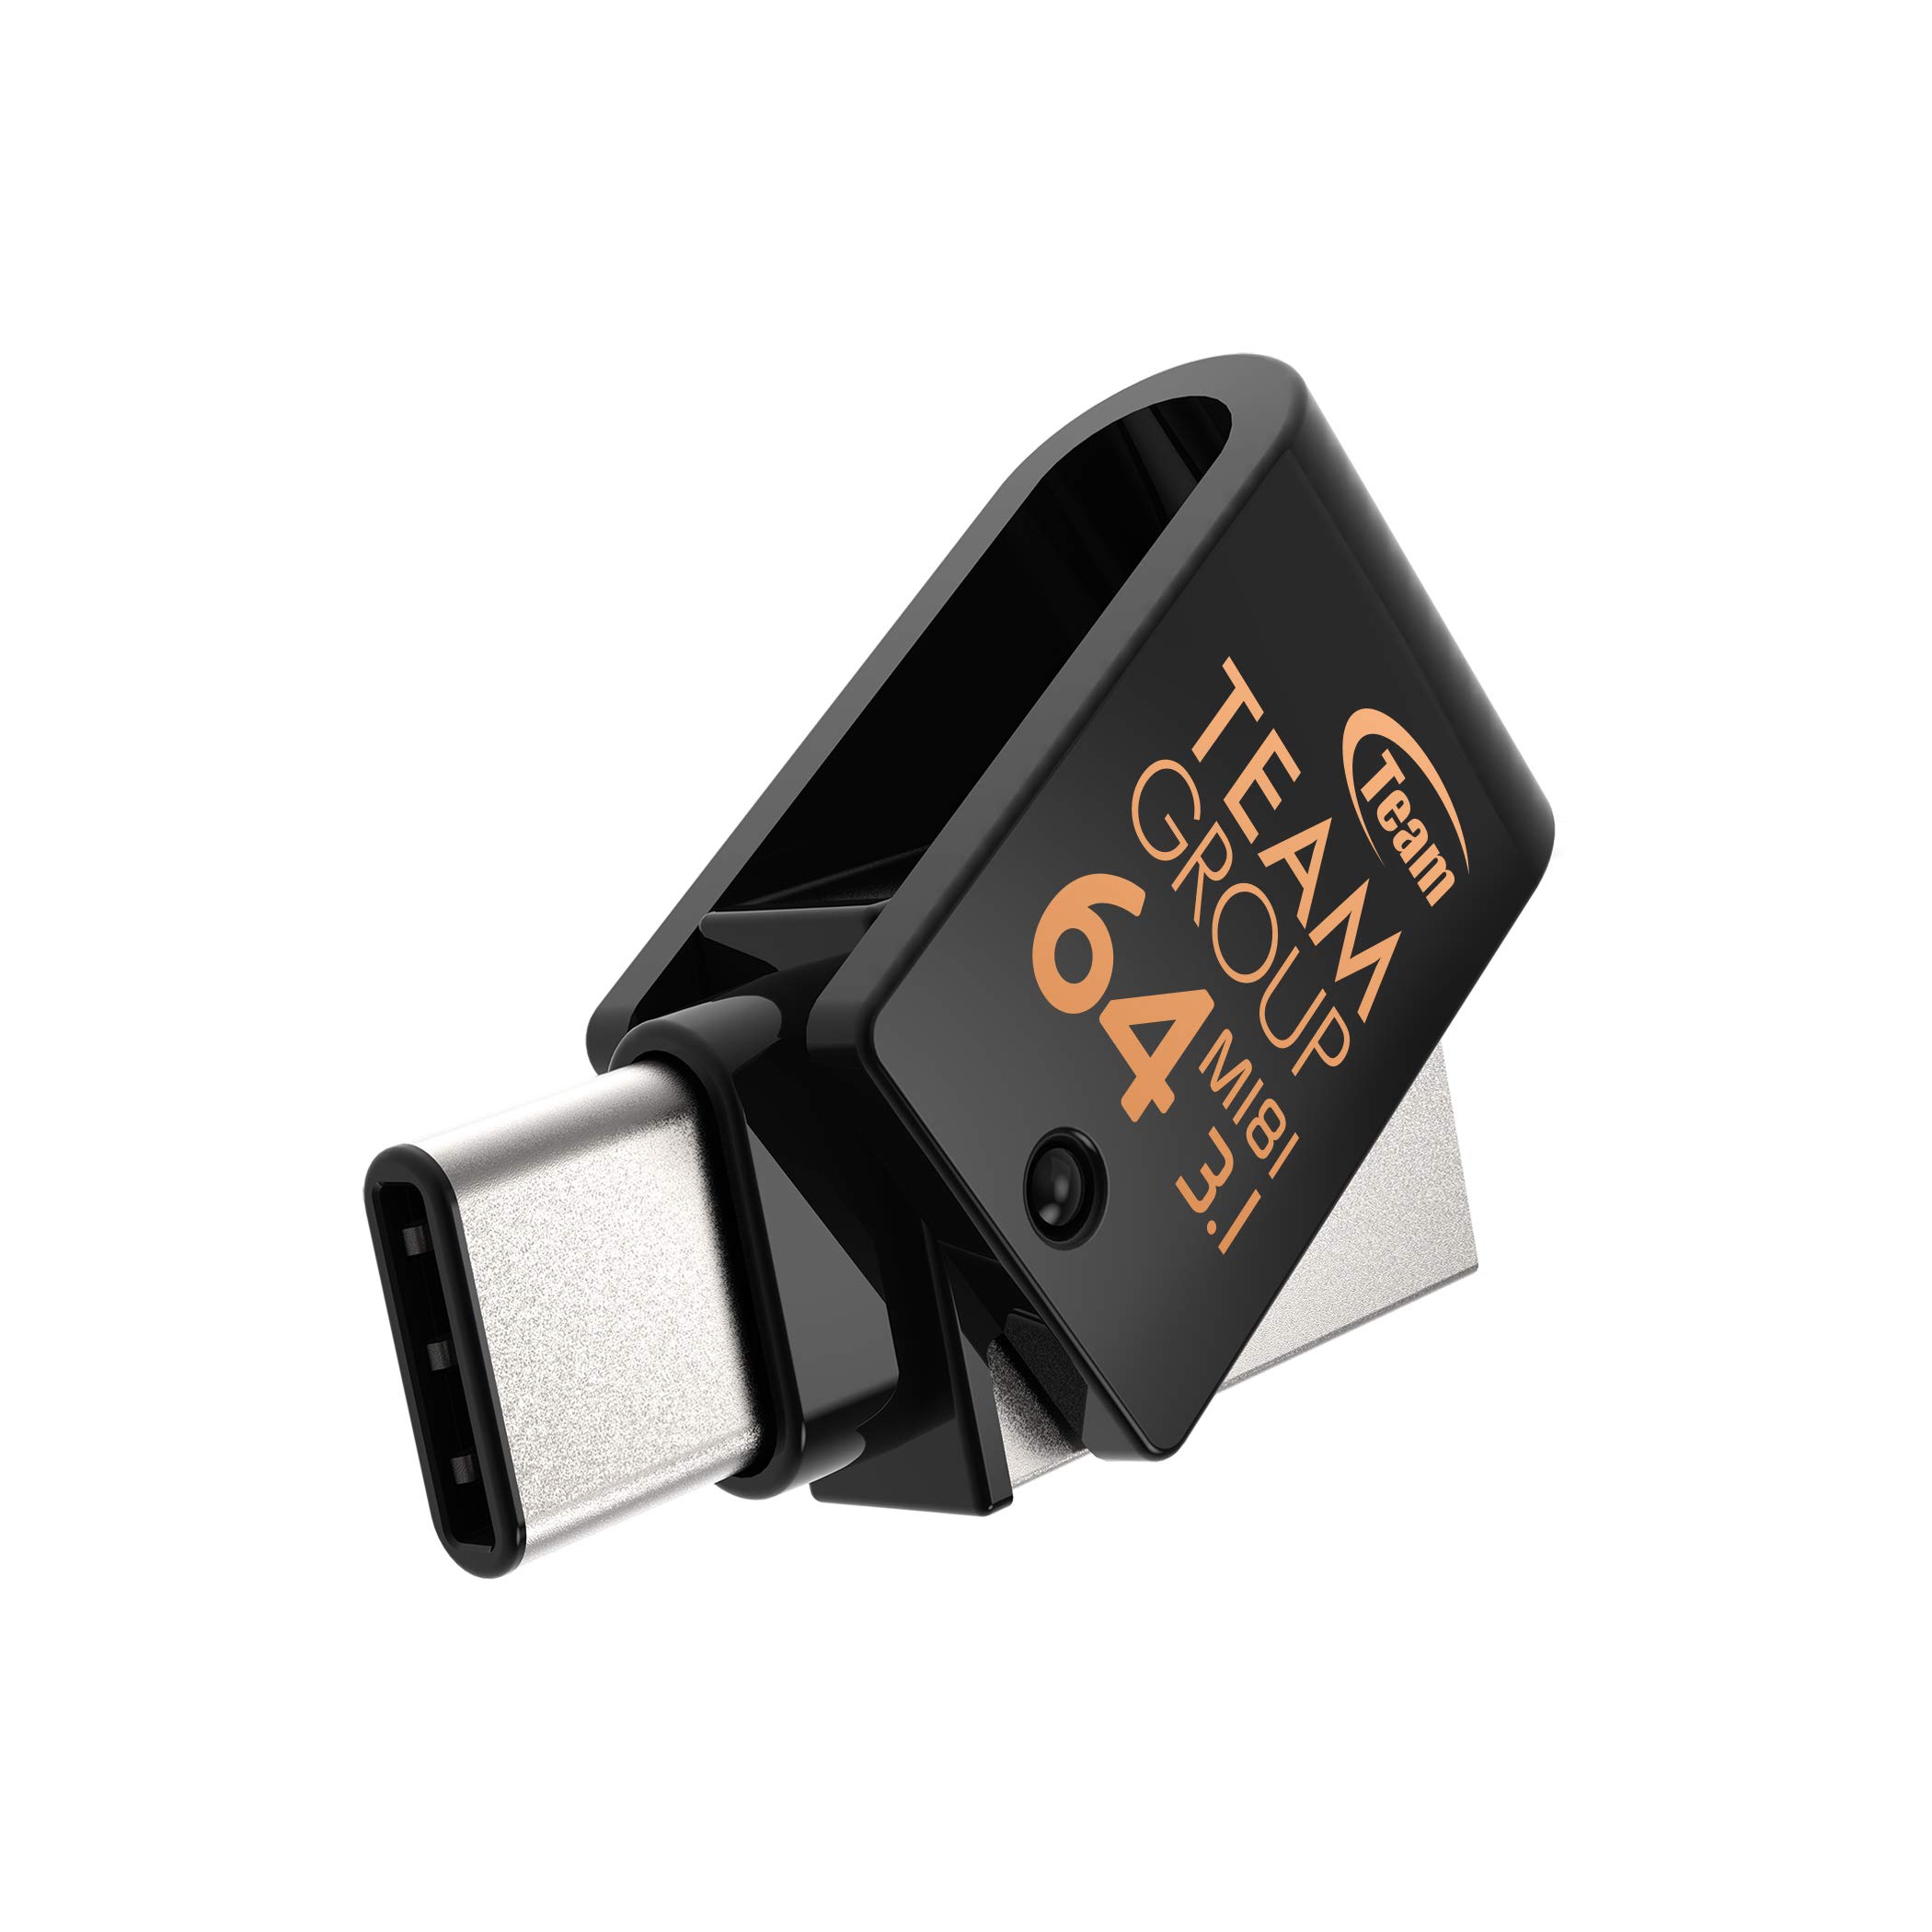 TeamGroup M181 USB-C OTG Pendrive (64GB | USB-C & USB 3.2 | Support Mobile/Tablet/PC | 33mm Compact Size)